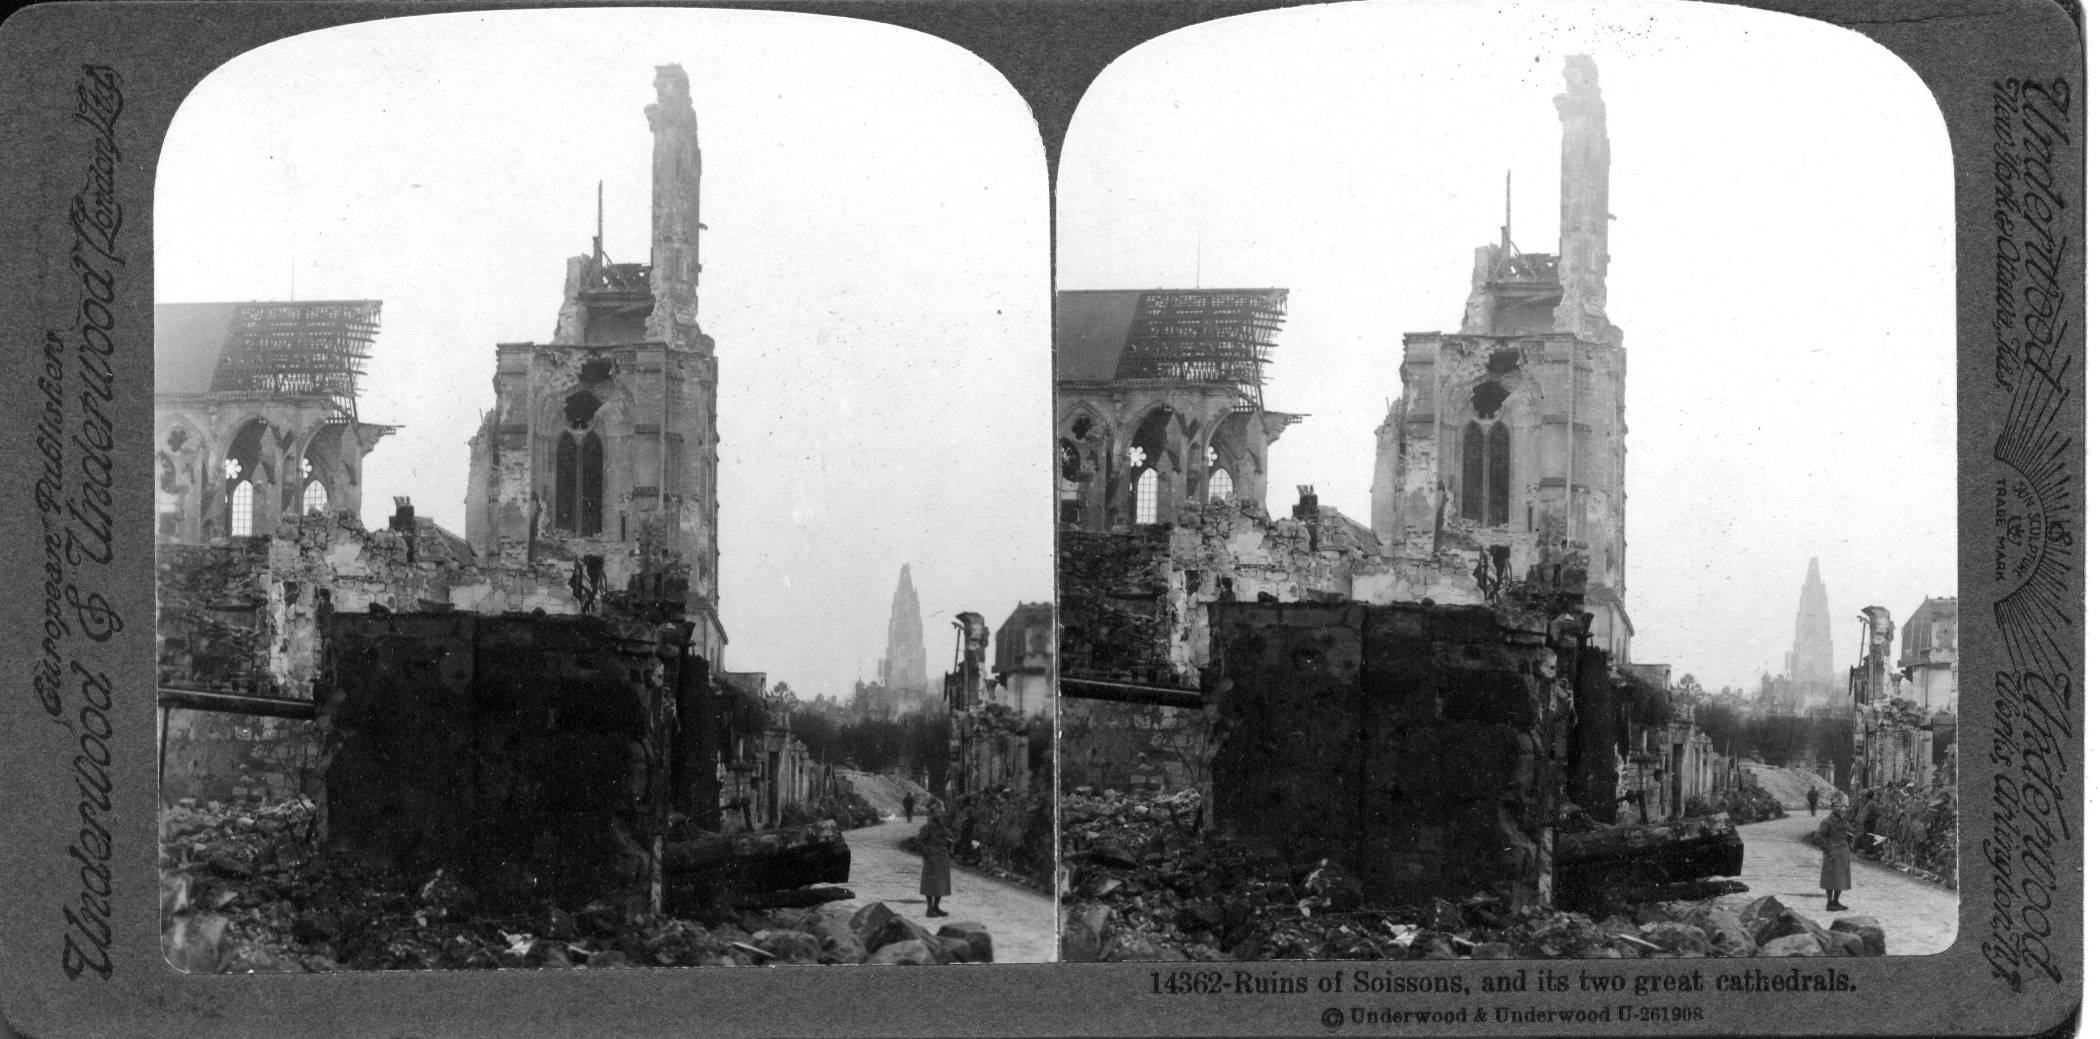 Ruins of Soissons, and its two great cathedrals